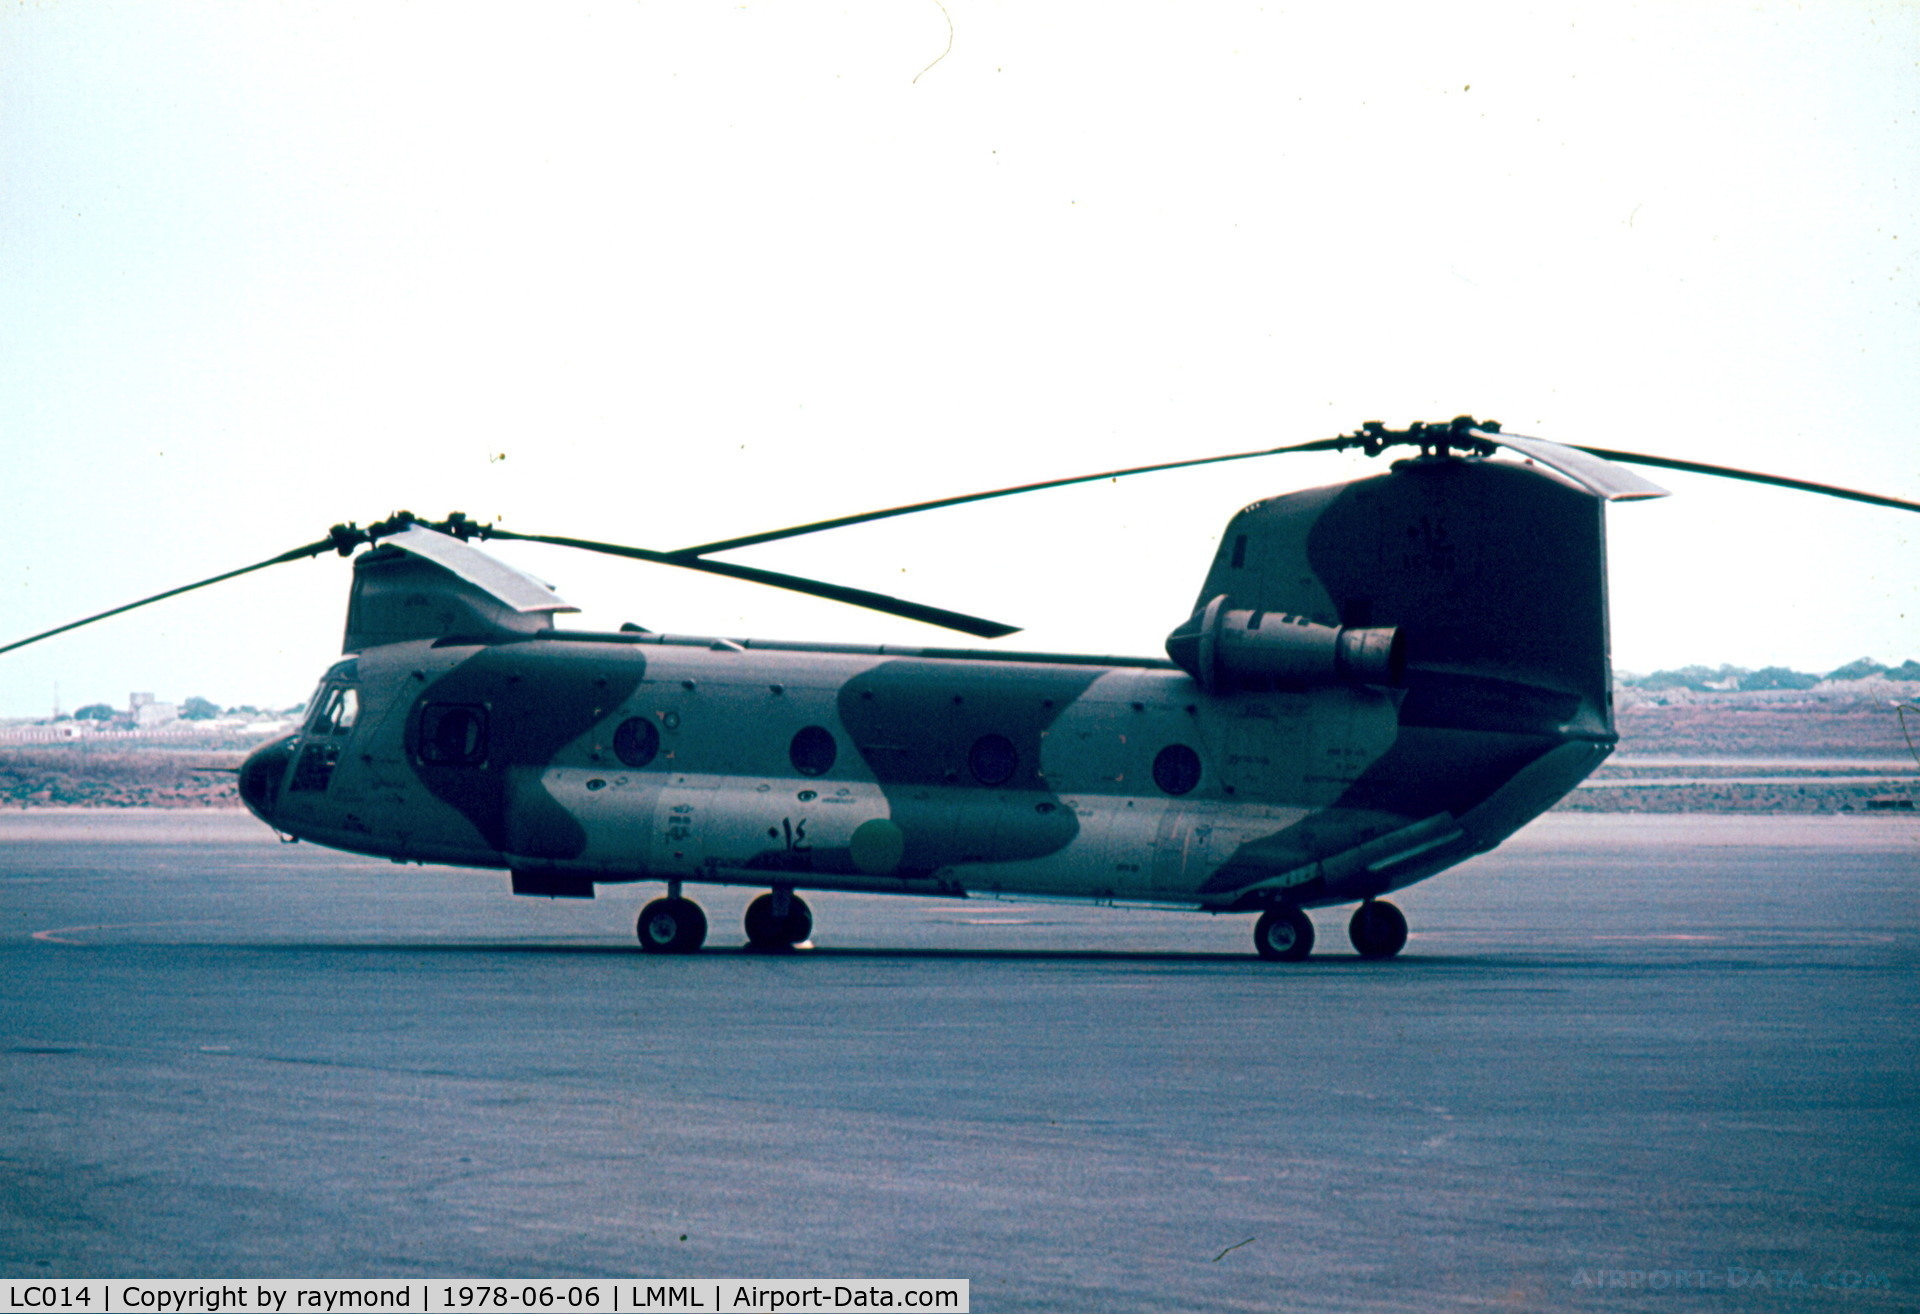 LC014, Boeing CH-47 C/N 014, Chinook LC014 Libyan Air Force